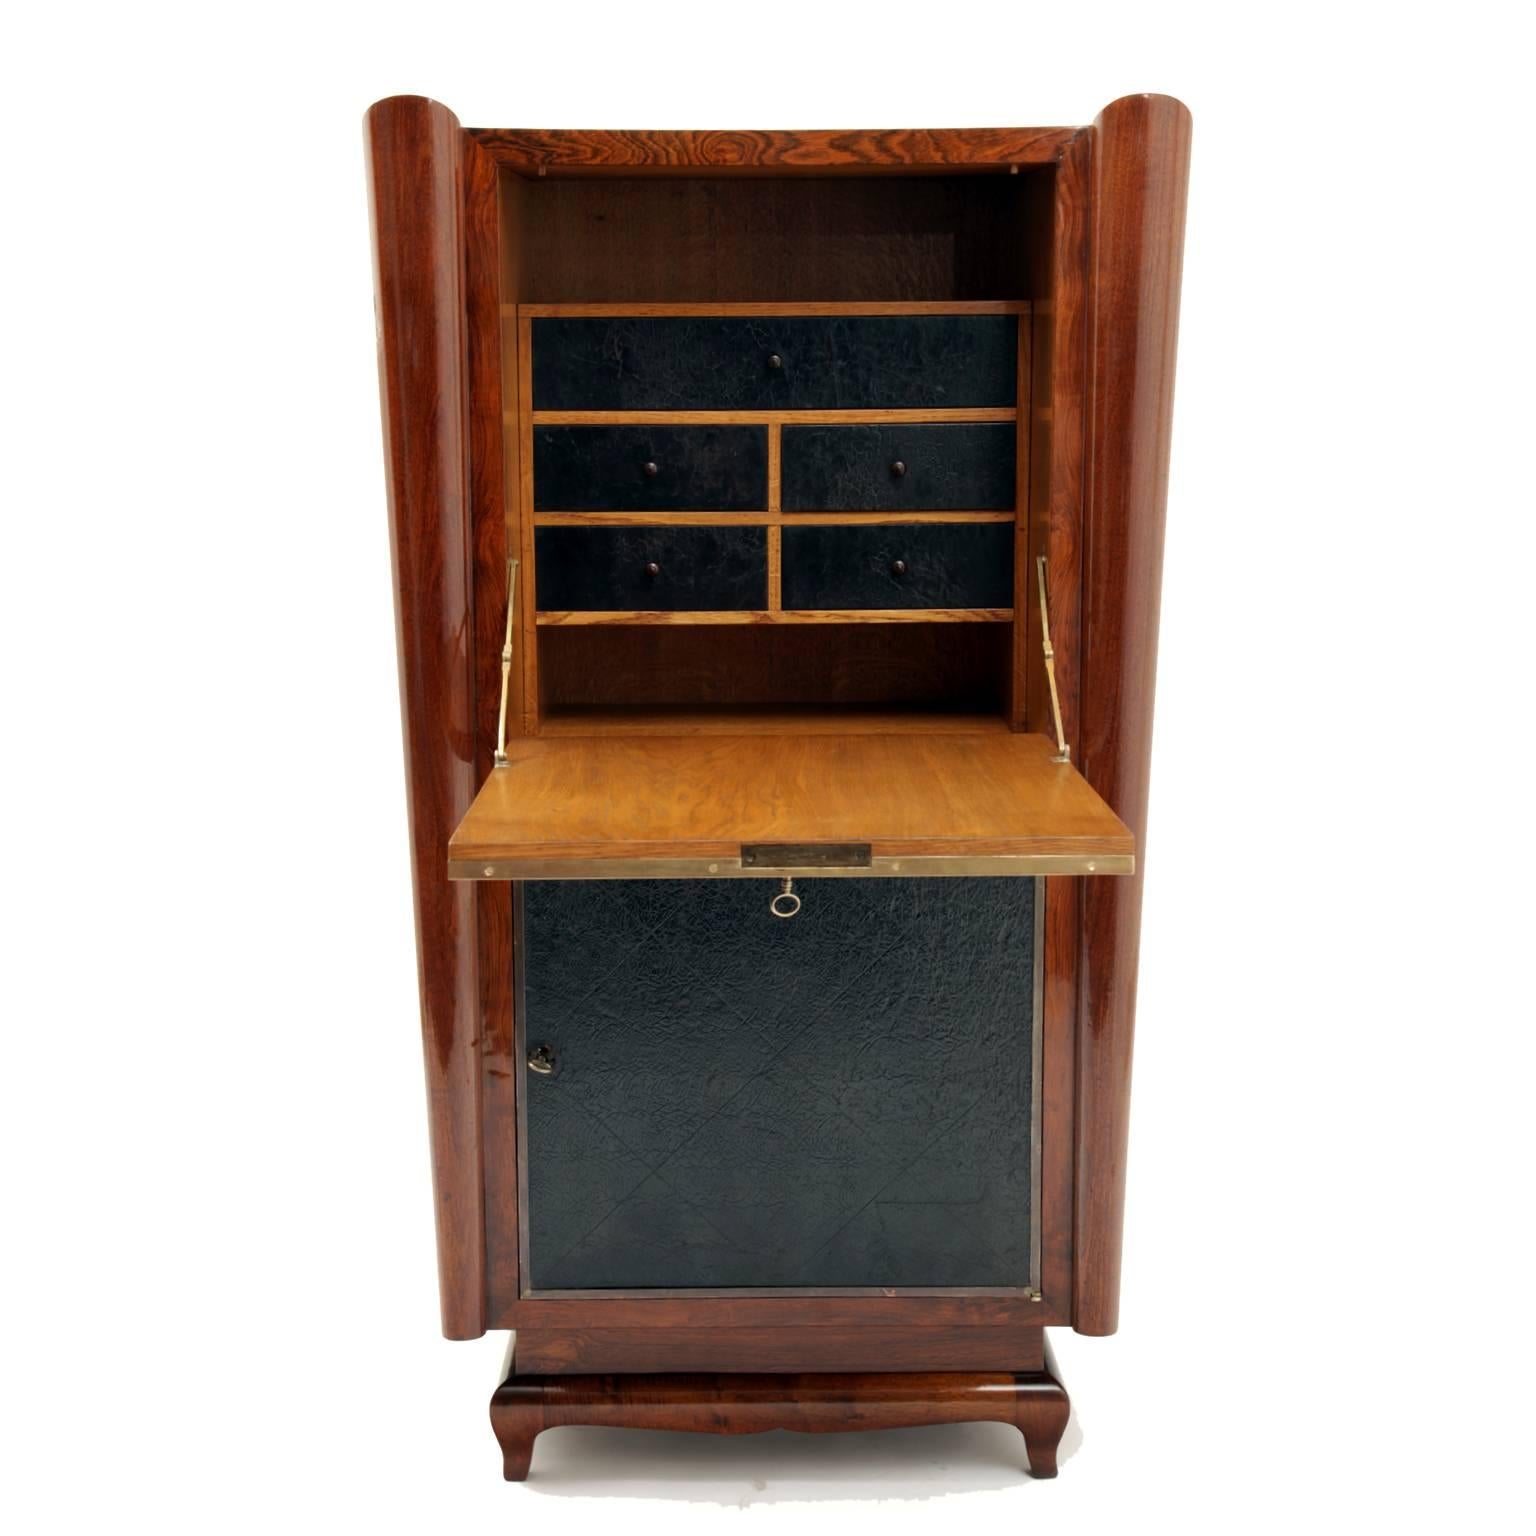 Slim Art Deco secretaire with trapezoidal corpus on low feet. The front is decorated with leather and framed with brass bars. The interior has two compartments and five drawers, also decorated with a textured leather. The lower cabinet has one shelf.